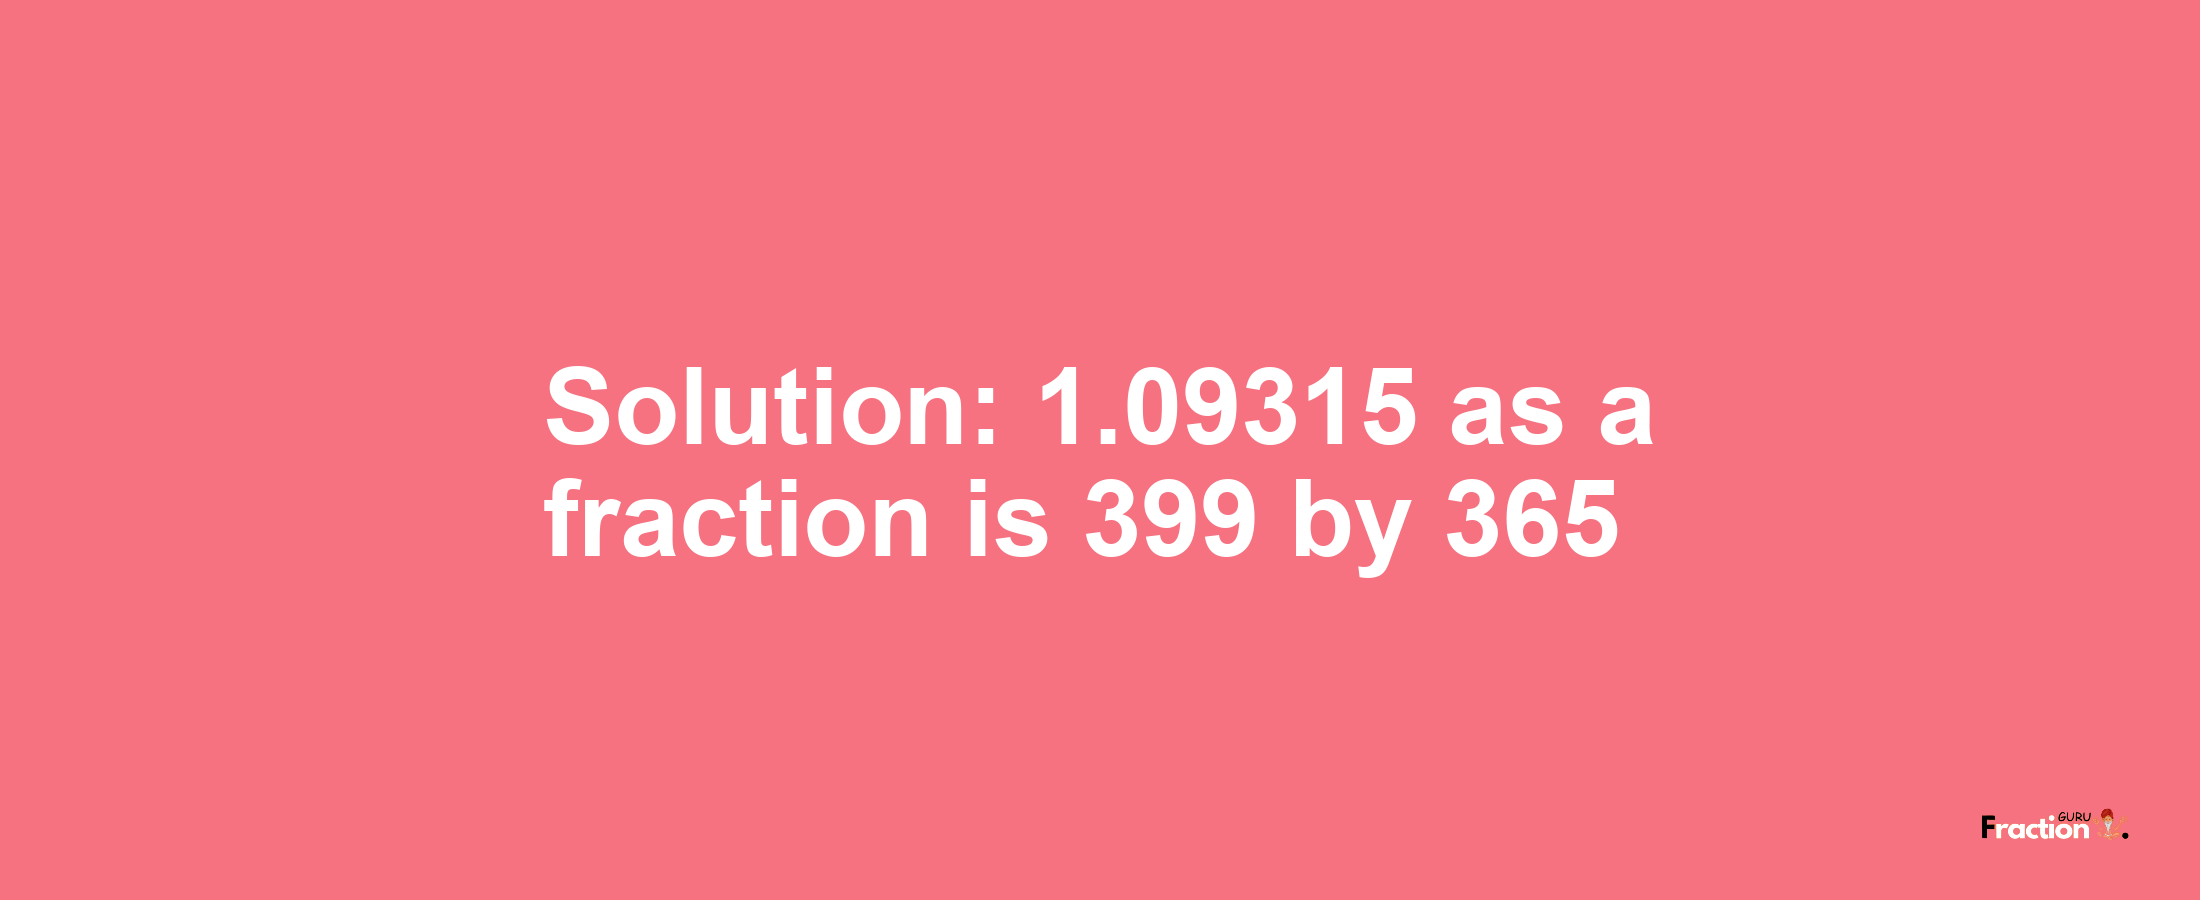 Solution:1.09315 as a fraction is 399/365